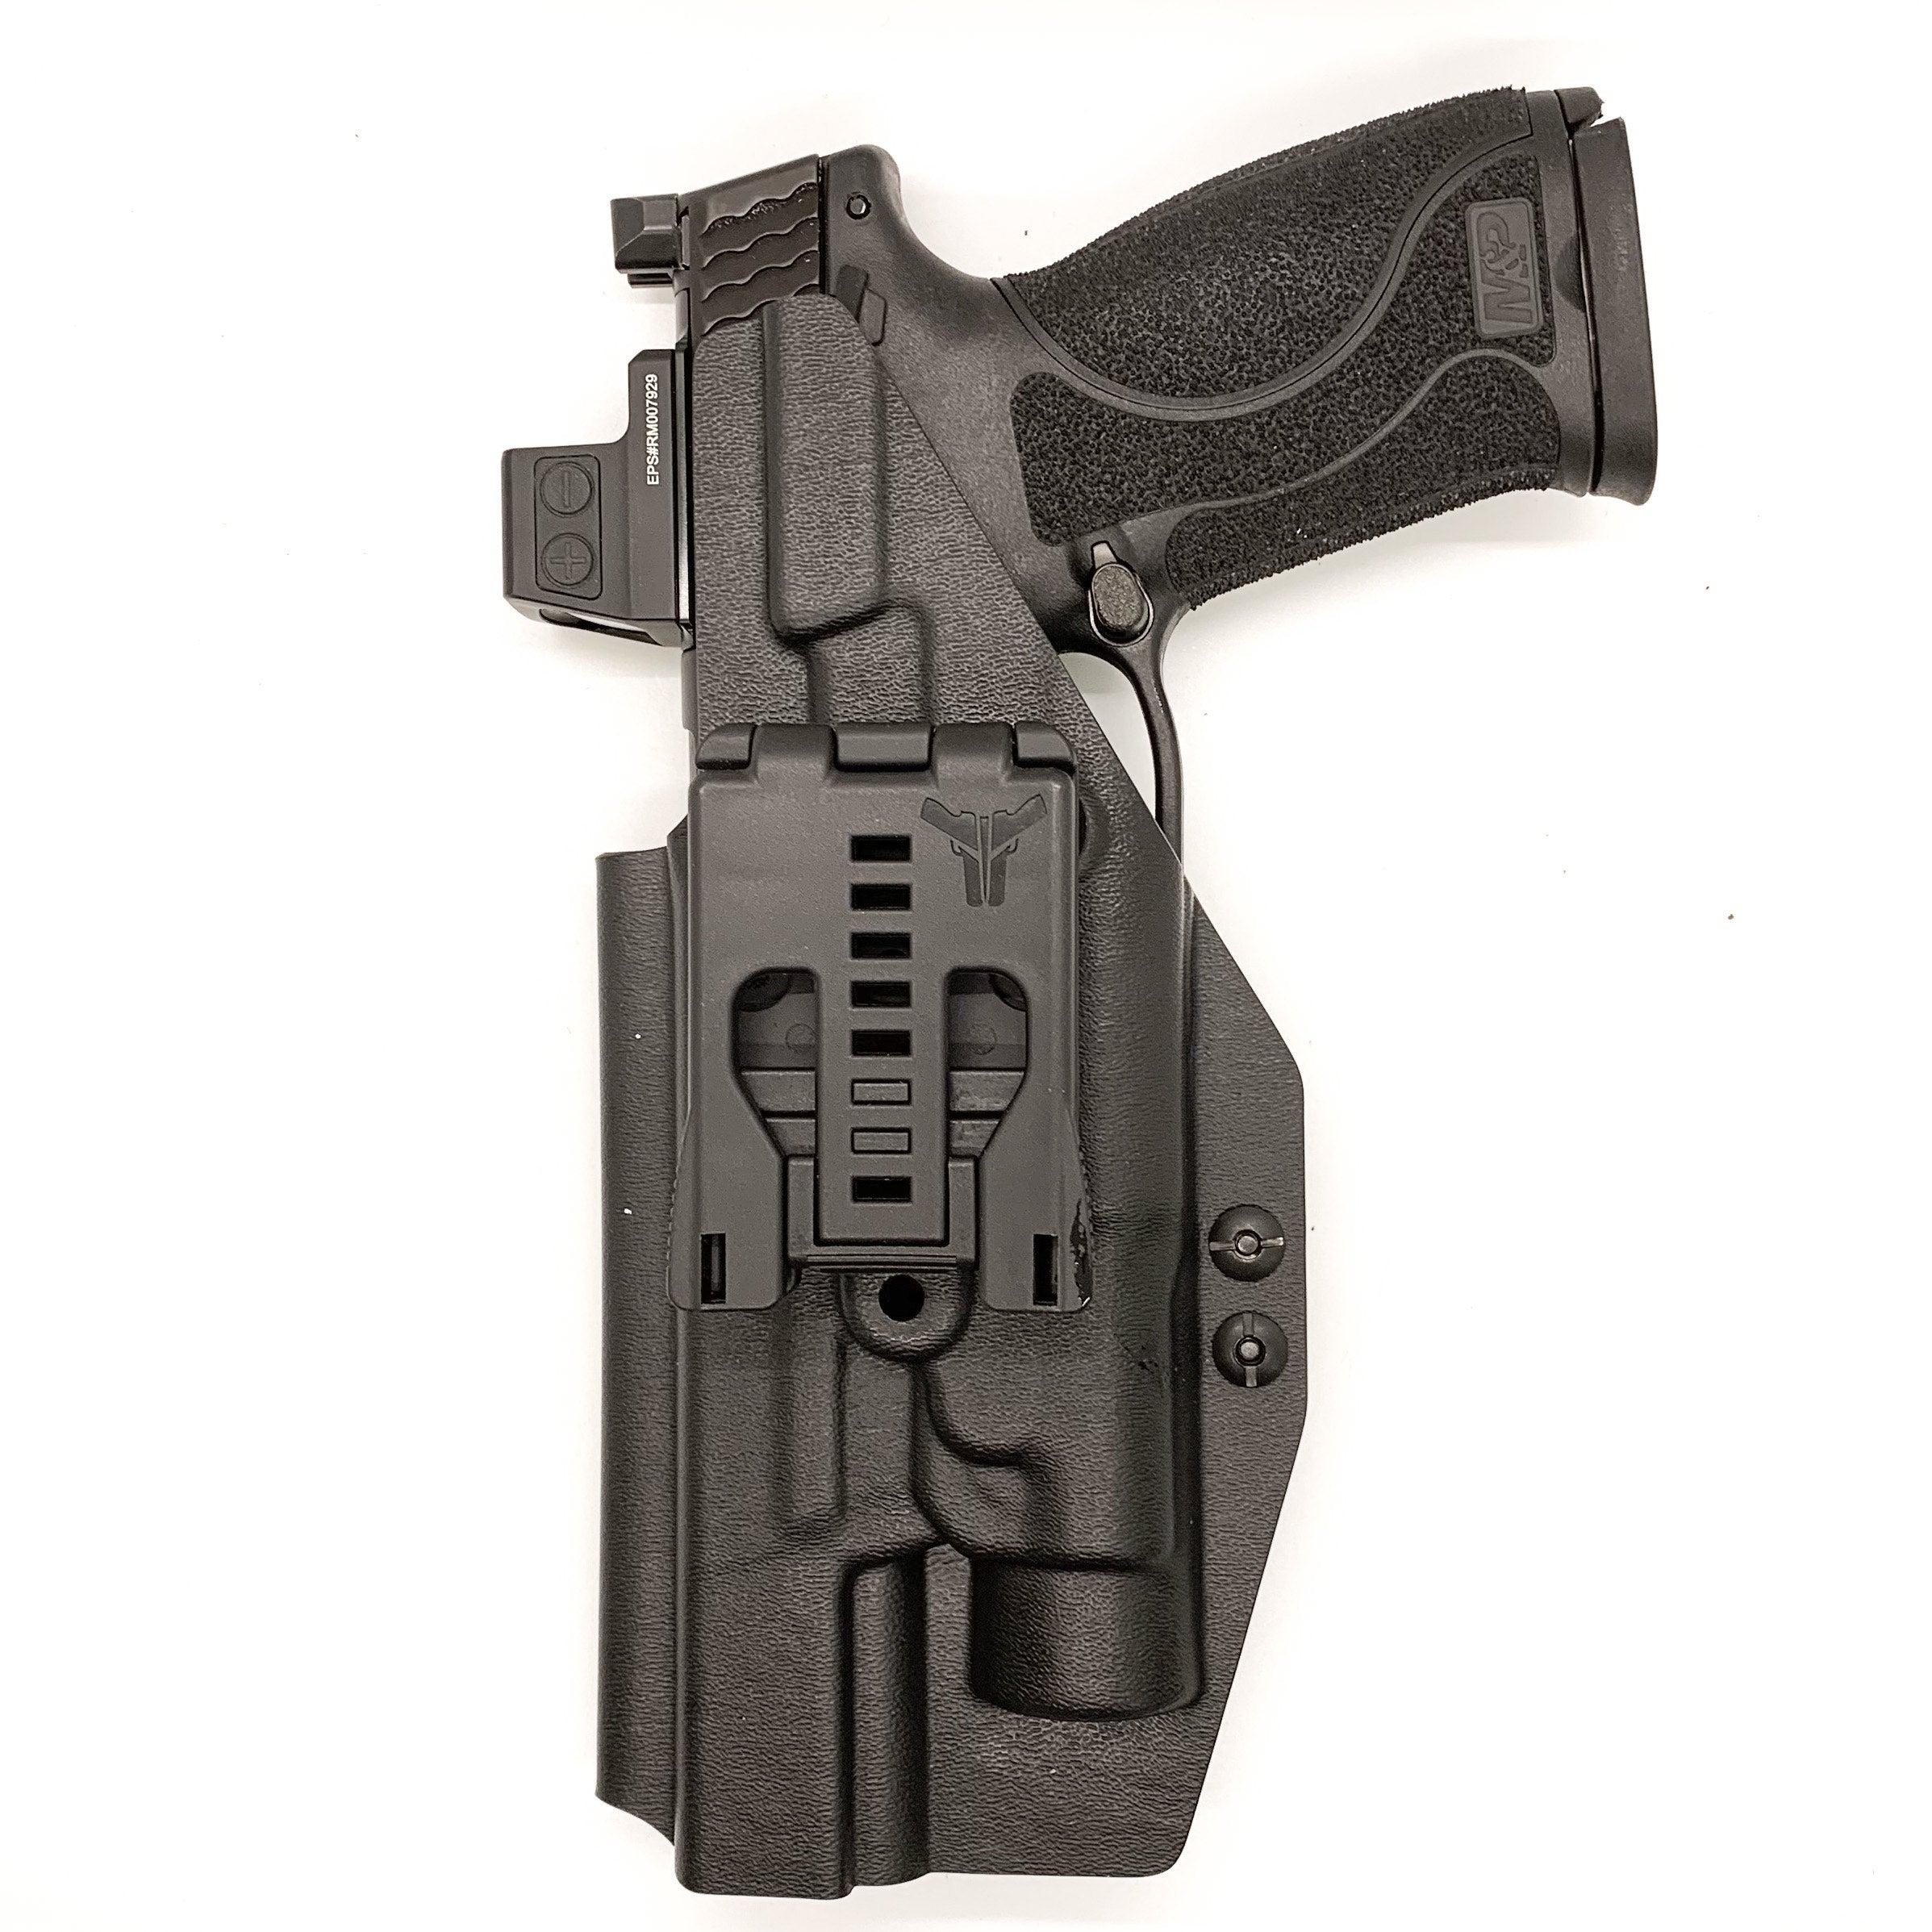 For the best, Outside Waistband OWB Kydex Holster designed to fit the Smith & Wesson M&P 10mm 5.6" Performance Center M2.0 pistol with thumb safety & TLR-1 handgun, shop Four Brothers Holsters.  Full sweat guard, adjustable retention. Made in USA Open muzzle for threaded barrels, cleared for red dot sights.  